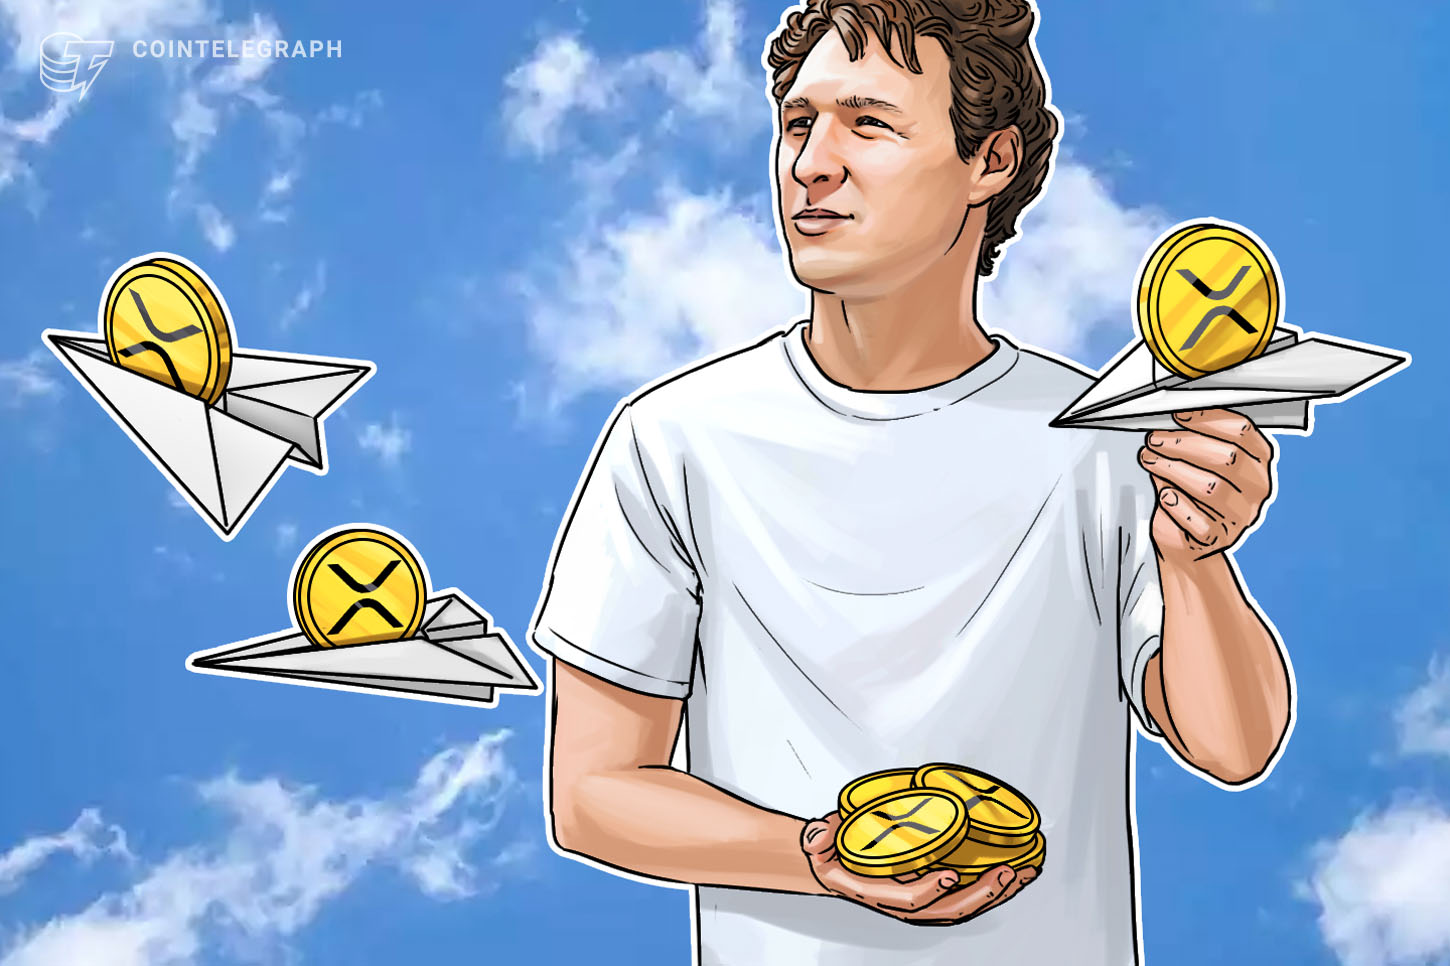 Ripple Co-founder Jed McCaleb Bought 54 Million XRP in April